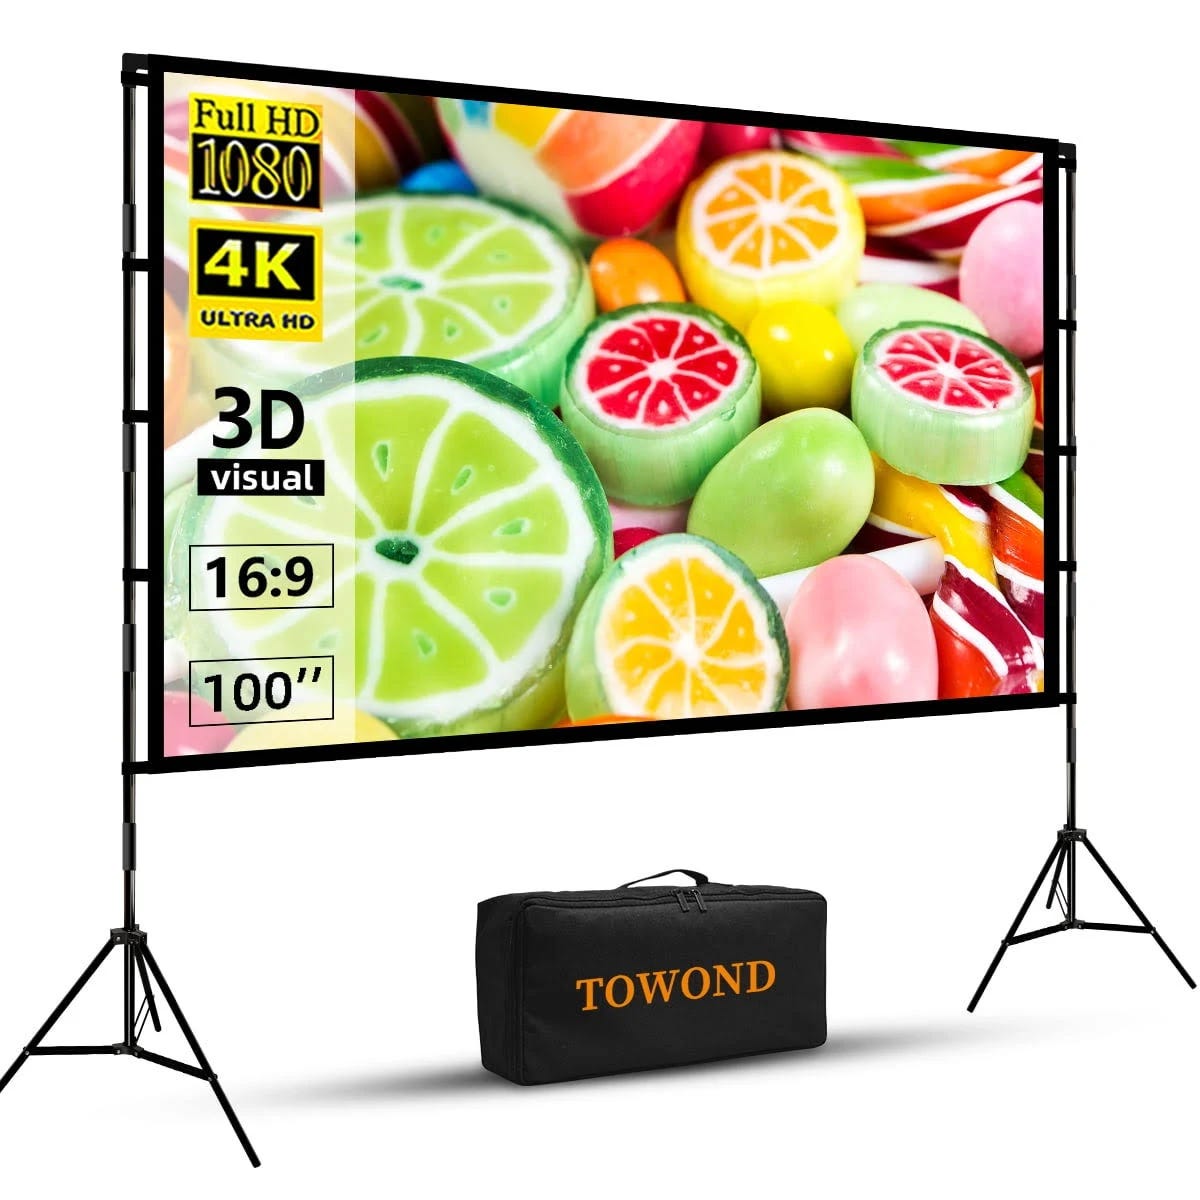 Towond Portable Outdoor 4K Projector Screen with Stand | Image